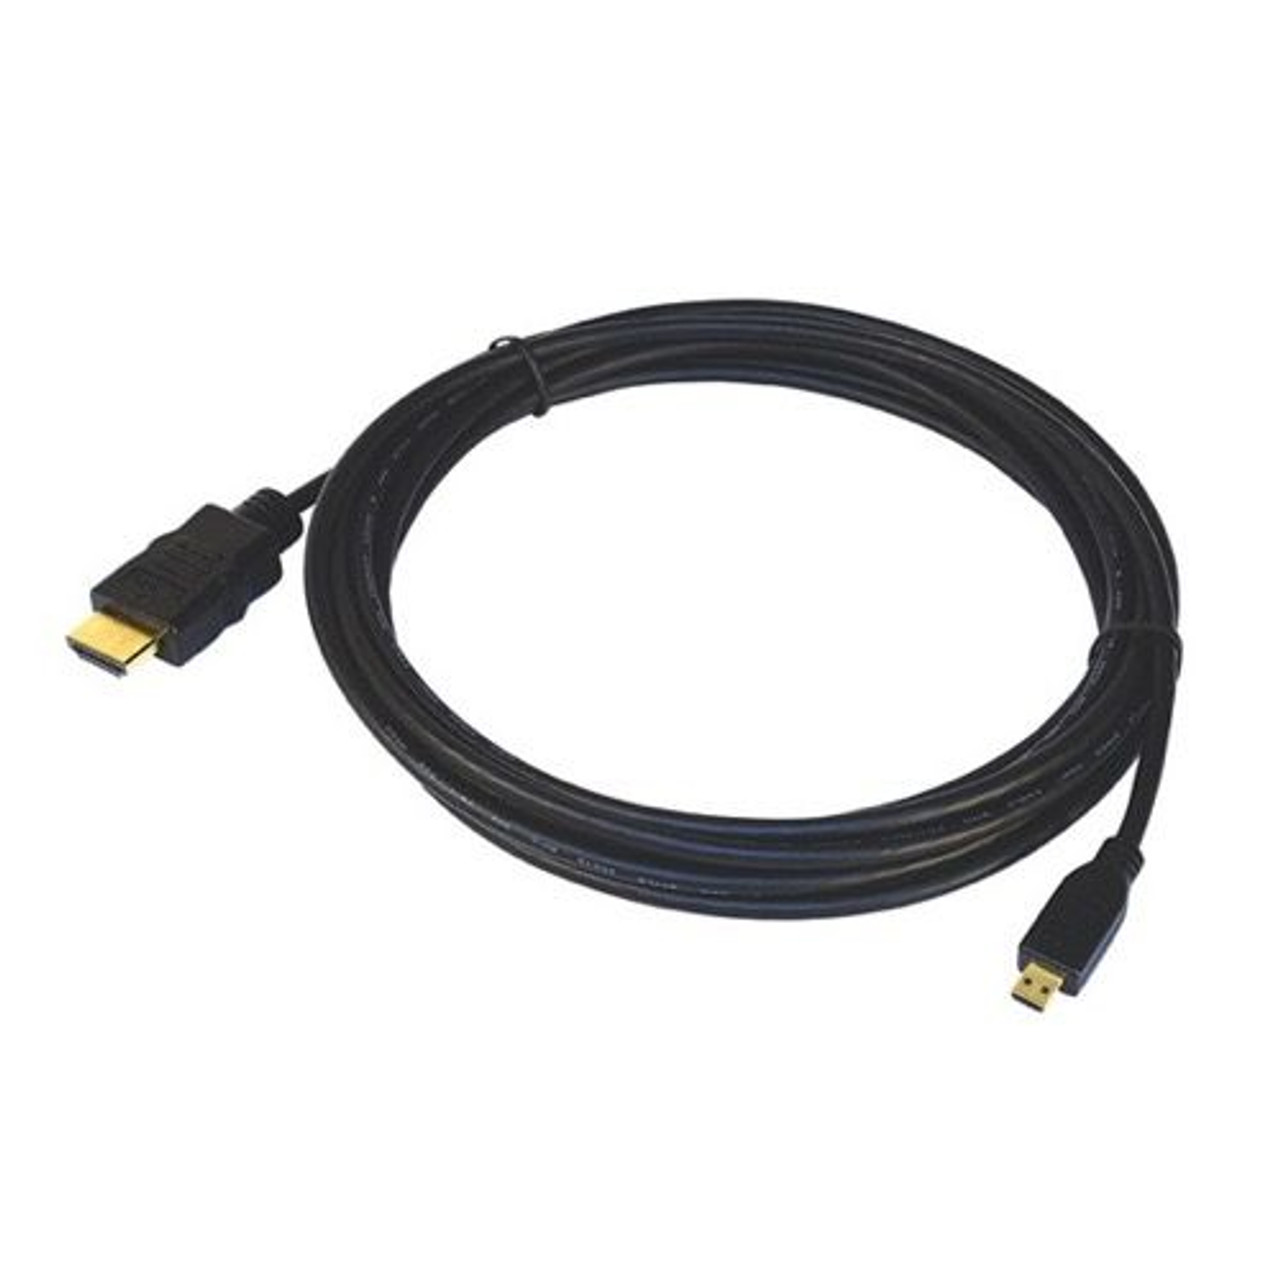 Steren 517-426BK 6' Ft HDMI Male to HDMI Micro Male Cable Digital Audio Video 1.4v 34 AWG Cable Pigtail Audio Video Smartphone To TV HDTV to Phone MicroHDMI to HDMI Cable